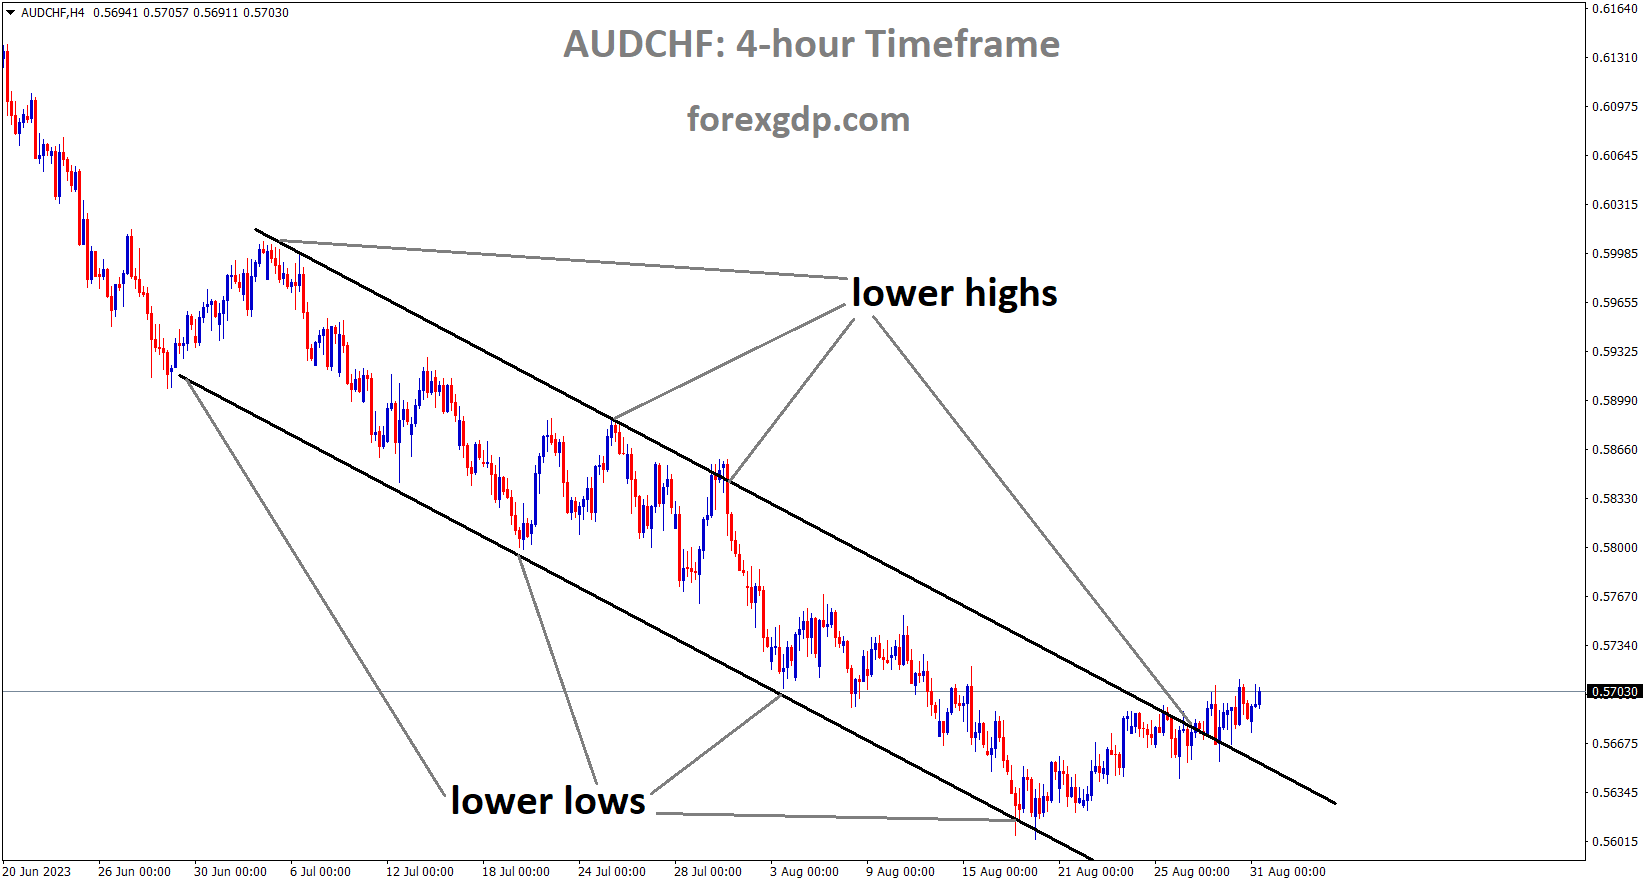 AUDCHF is moving in the Descending channel and the market has reached the lower high area of the channel